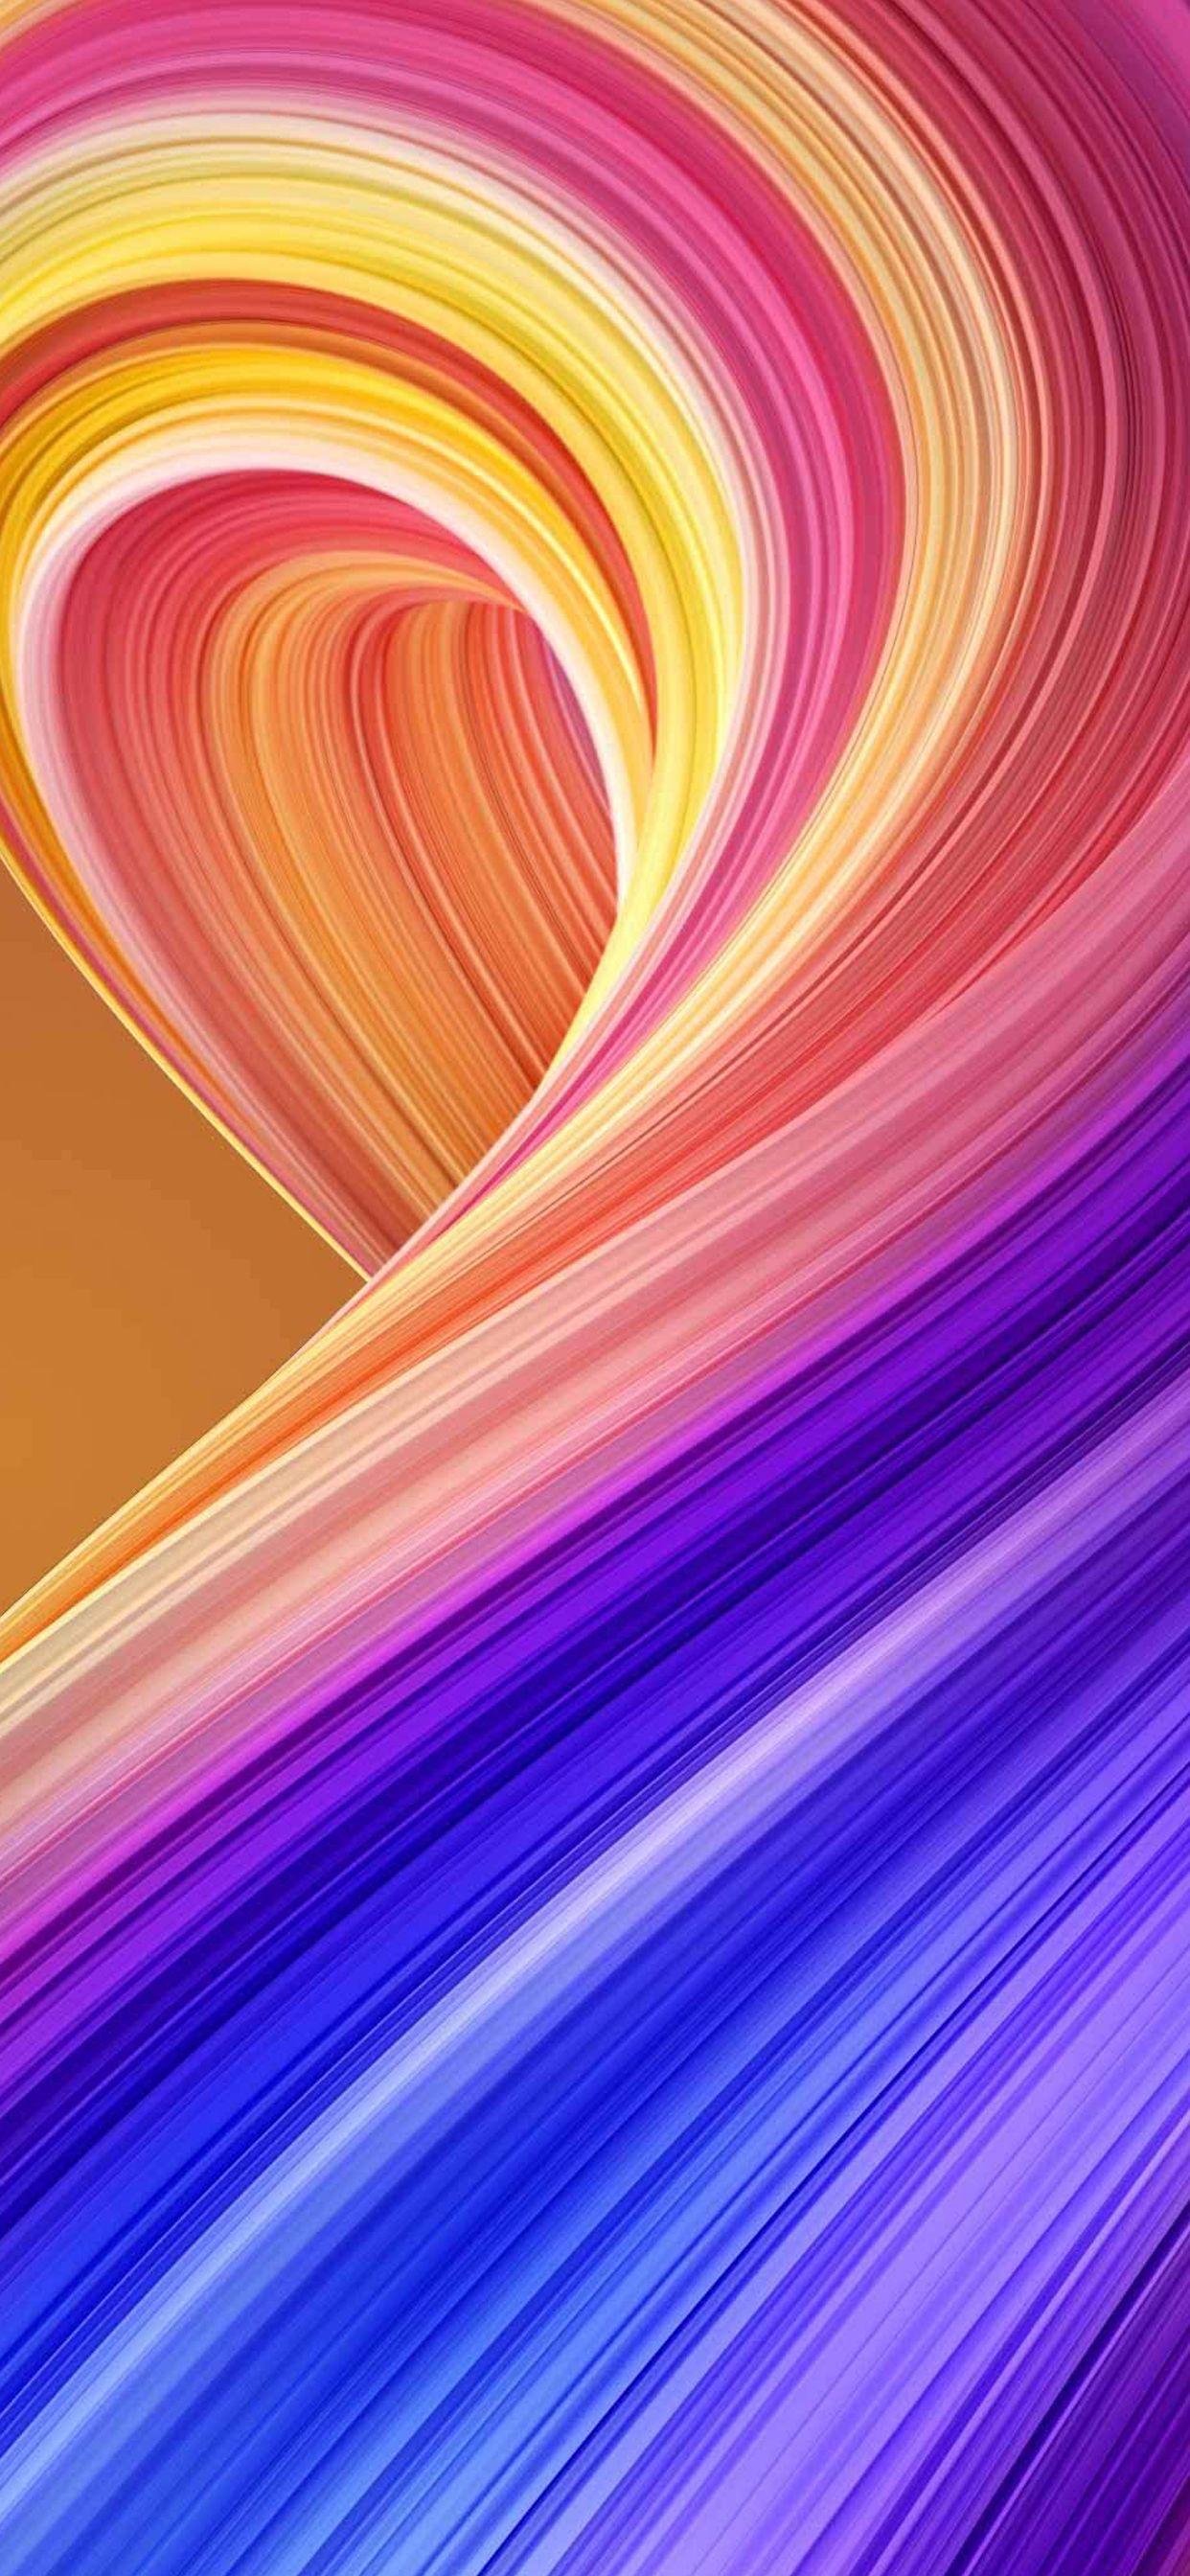 Best Alternative Wallpaper for Apple iPhone XS Max 07 of 10